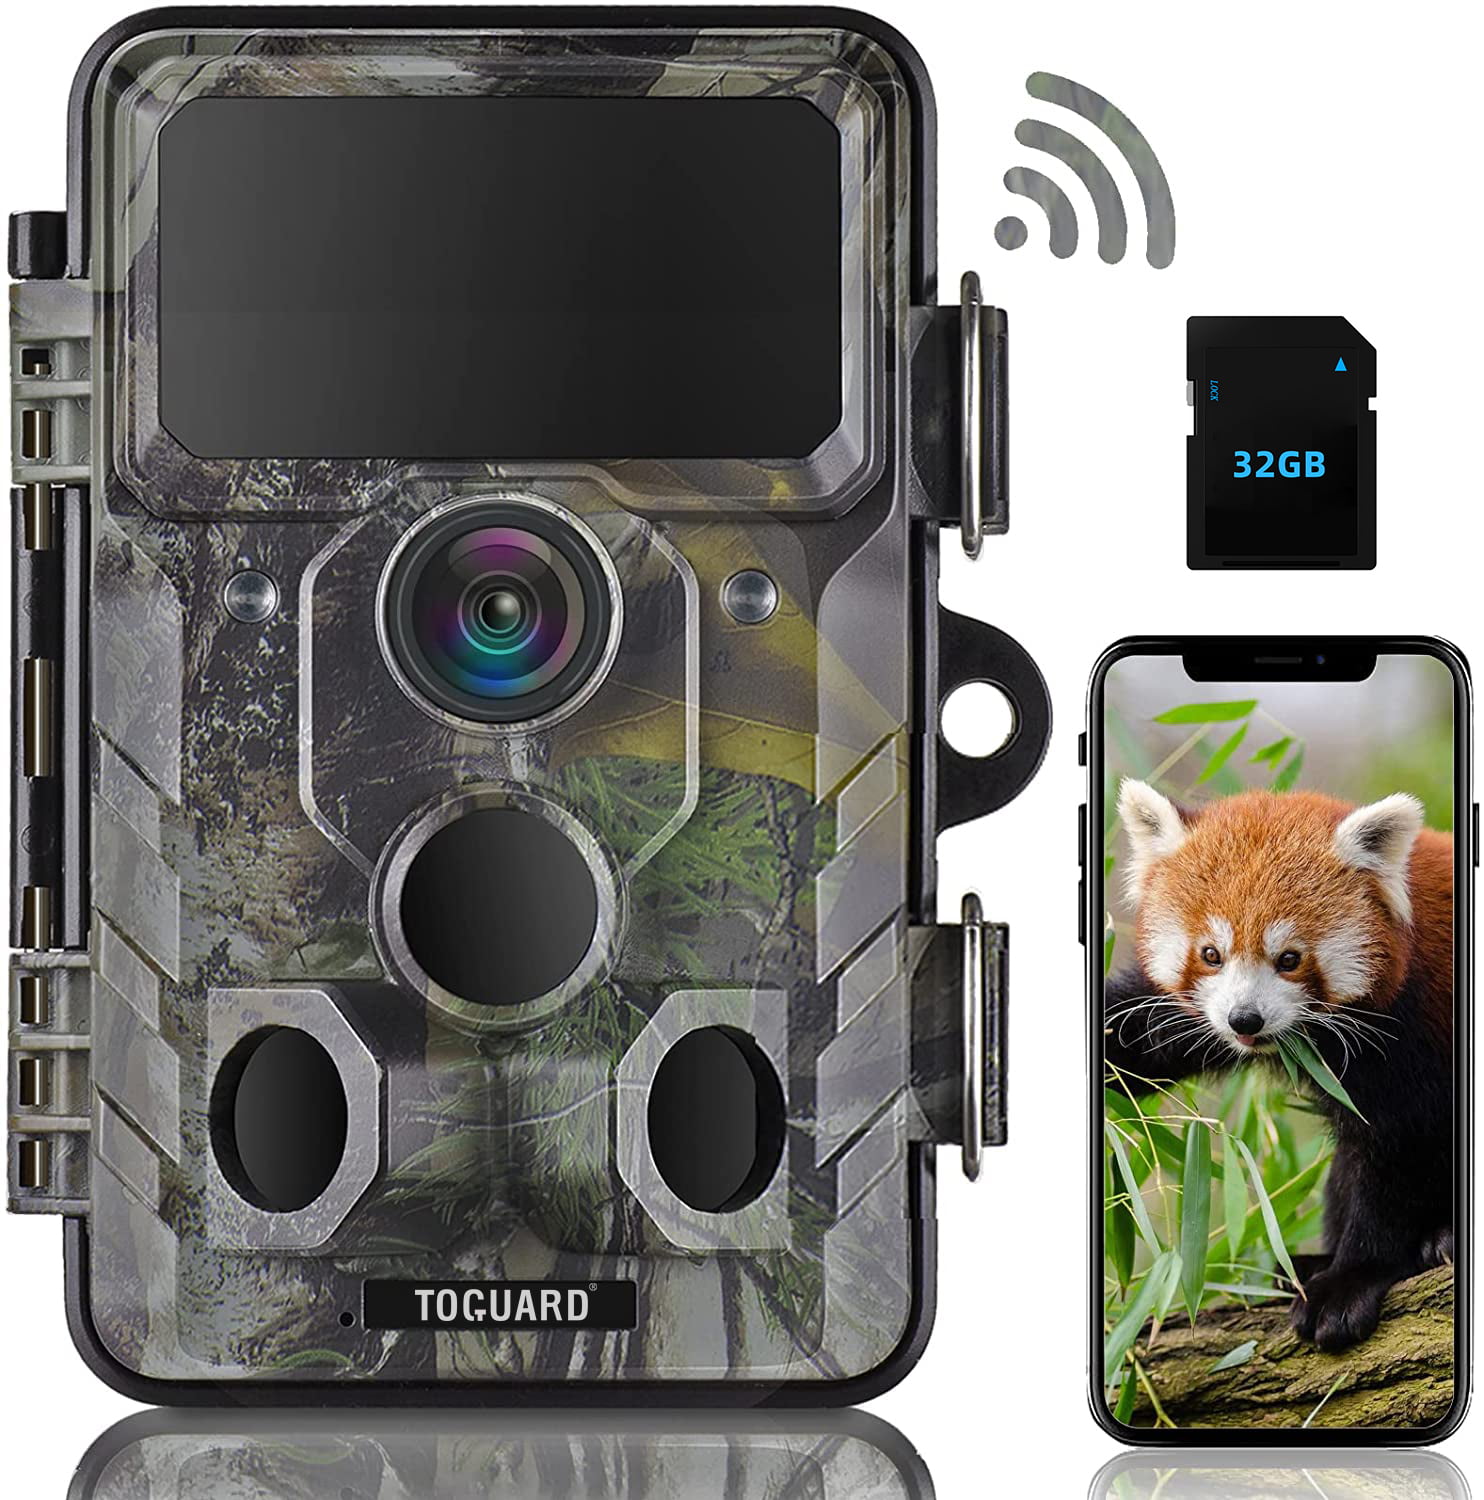 Solar Panel 2A Power Charging for Hunting Trail Game Camera TOGUARD H85 6V 